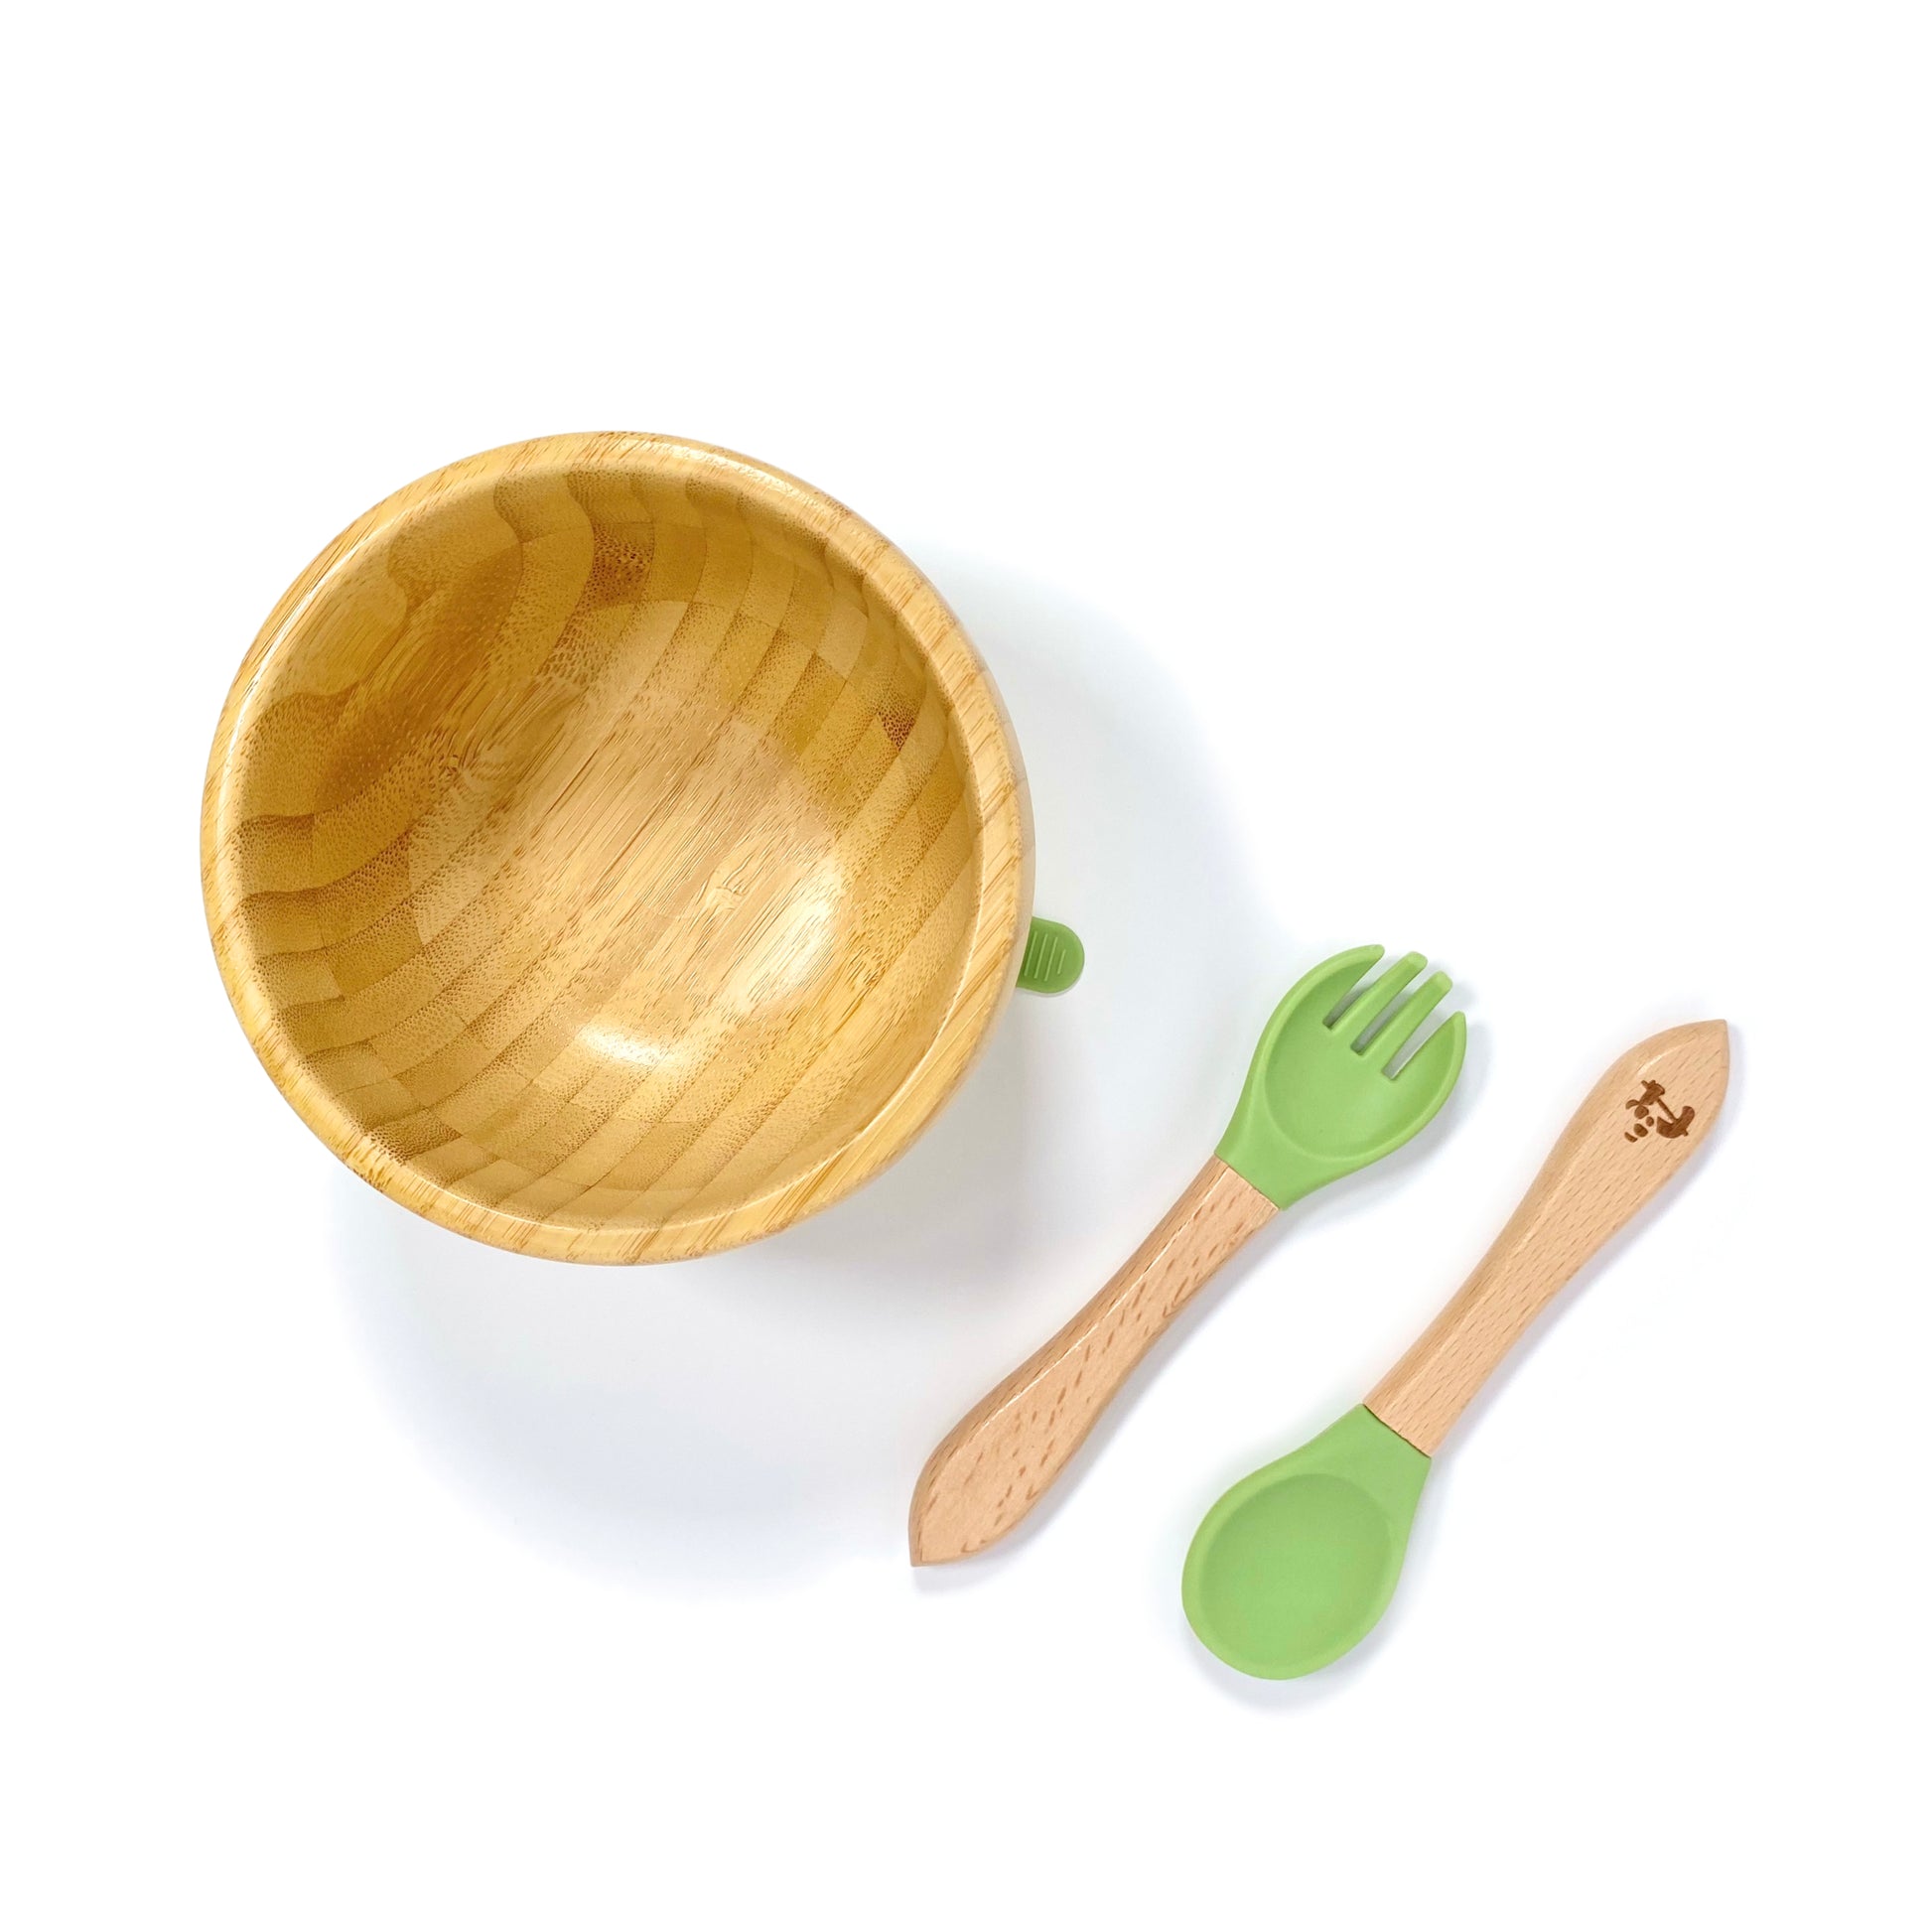 A children’s bamboo bowl with an olive green silicone suction ring, and matching olive green silicone and bamboo cutlery.